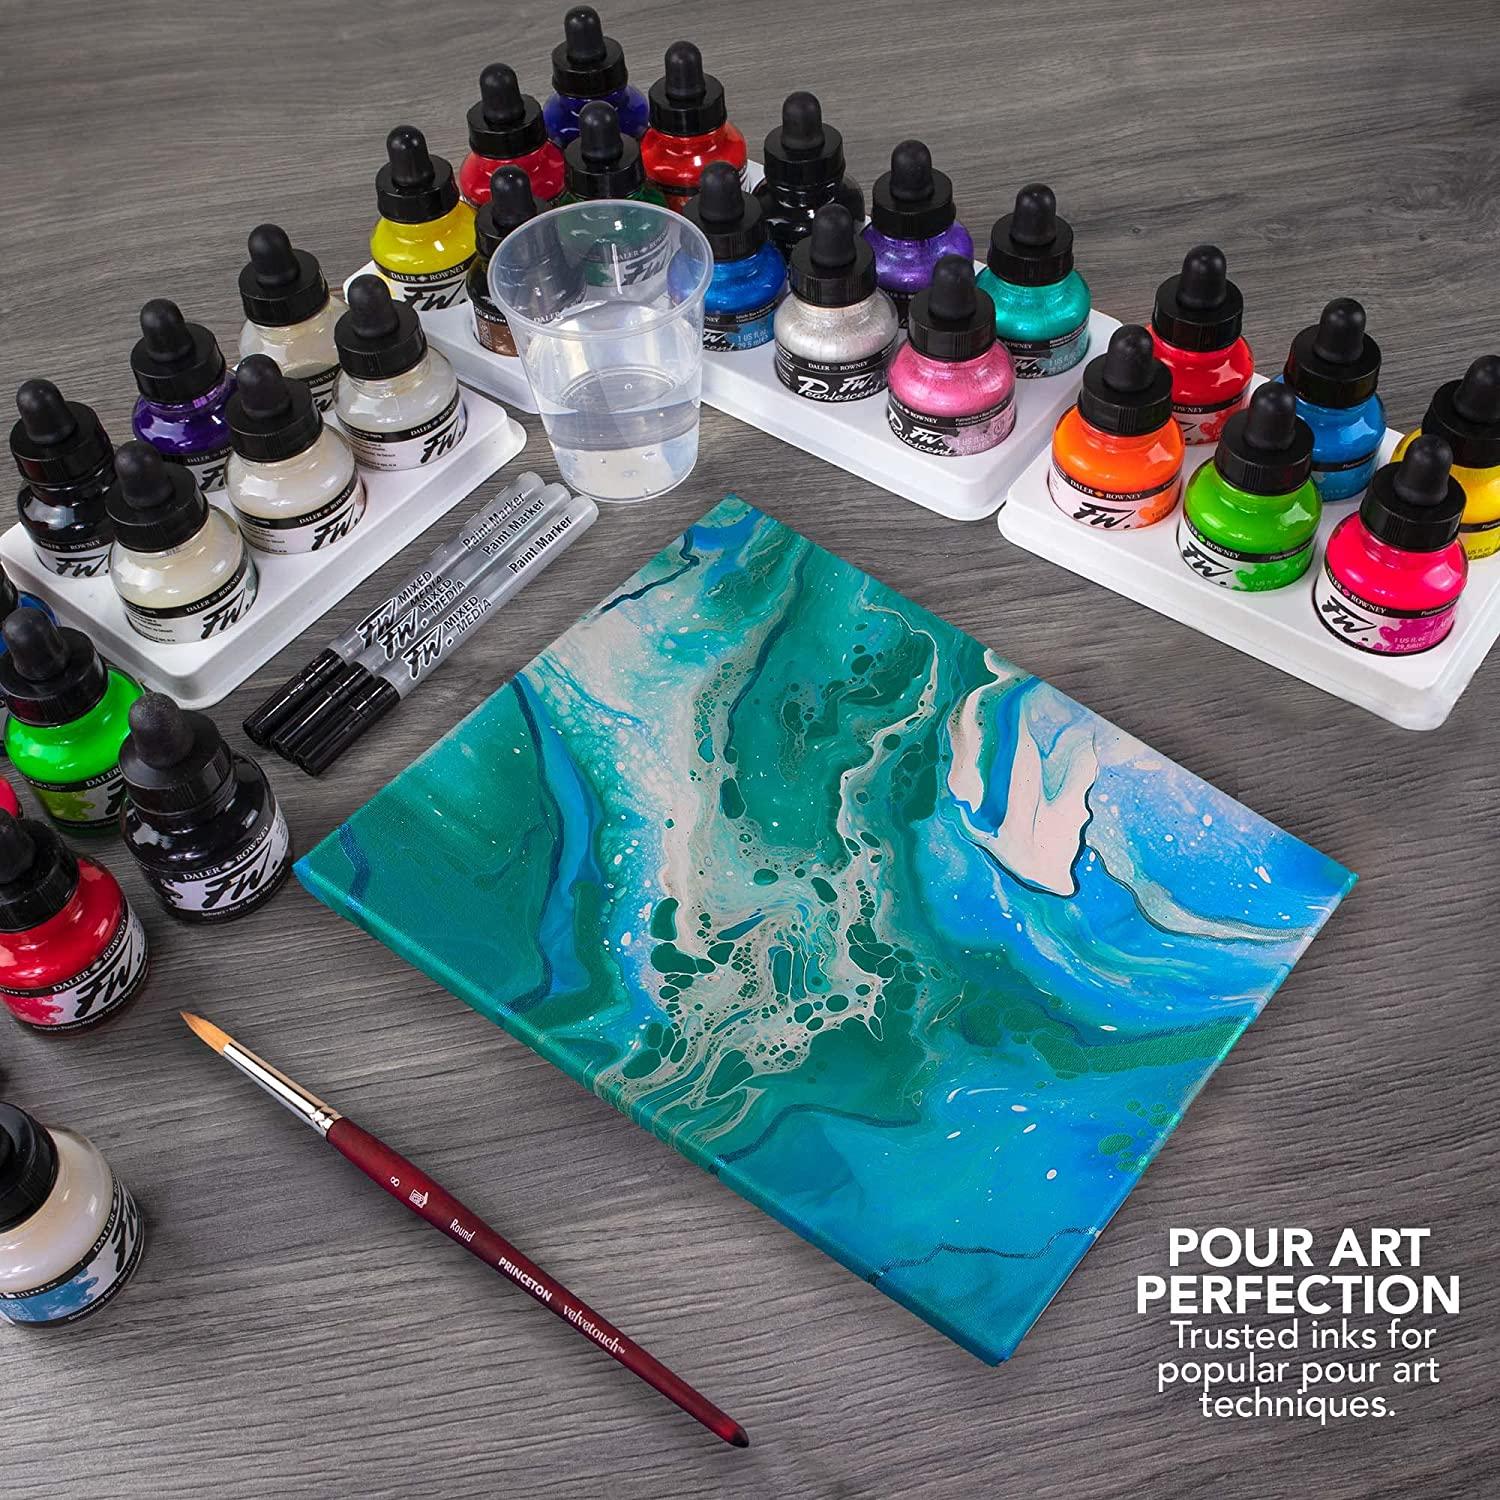  Daler-Rowney Aquafine Watercolor Ink 6-Color Intro Set with  Marker - Versatile Liquid Watercolor Ink for Artists and Students - Use  with Paint Brushes, Technical Pens, Airbrushes, and Paint Markers